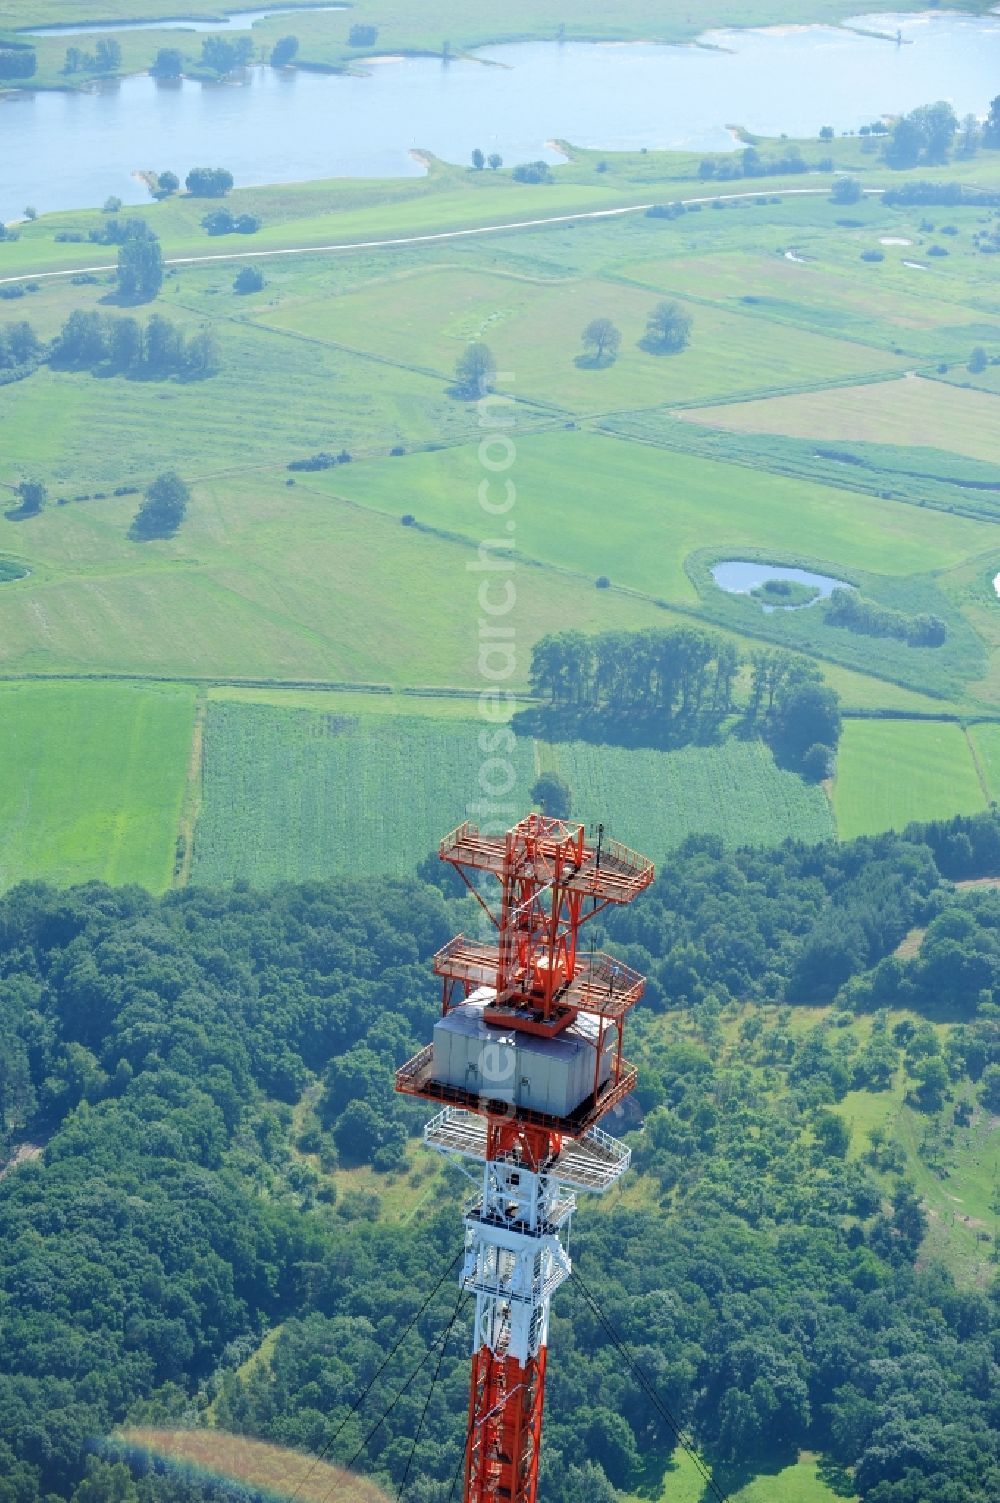 Dannenberg from the bird's eye view: The radio tower at Höhbeck Dannenberg in Lower Saxony